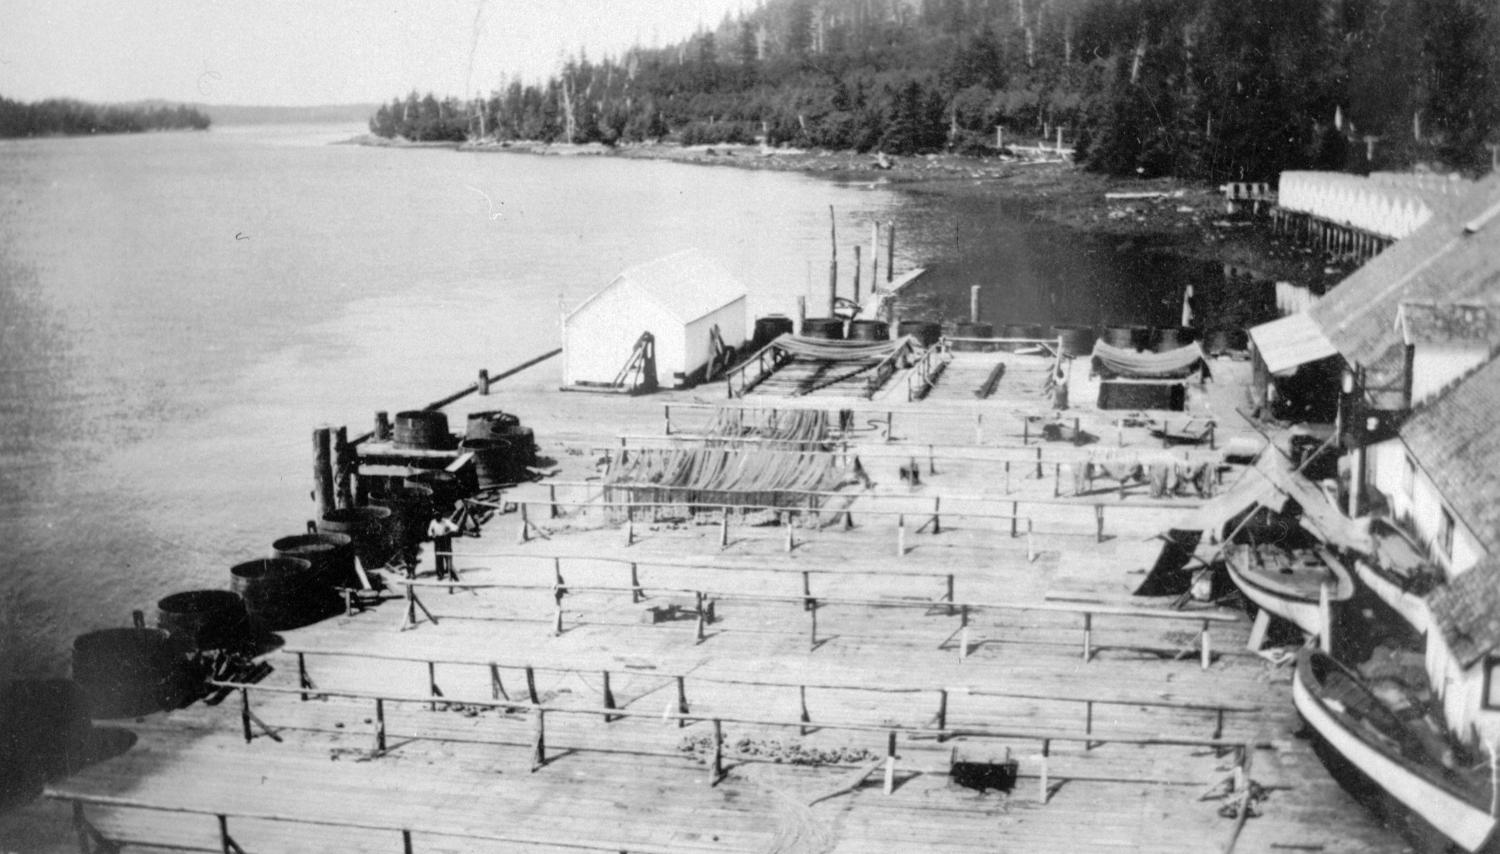 The main working dock connected the main cannery buildings, and was a site of much activity throughout the cannery season. It was here that a fresh catch was unloaded to be processed. Fishermen used the space for net maintenance and boat repair.